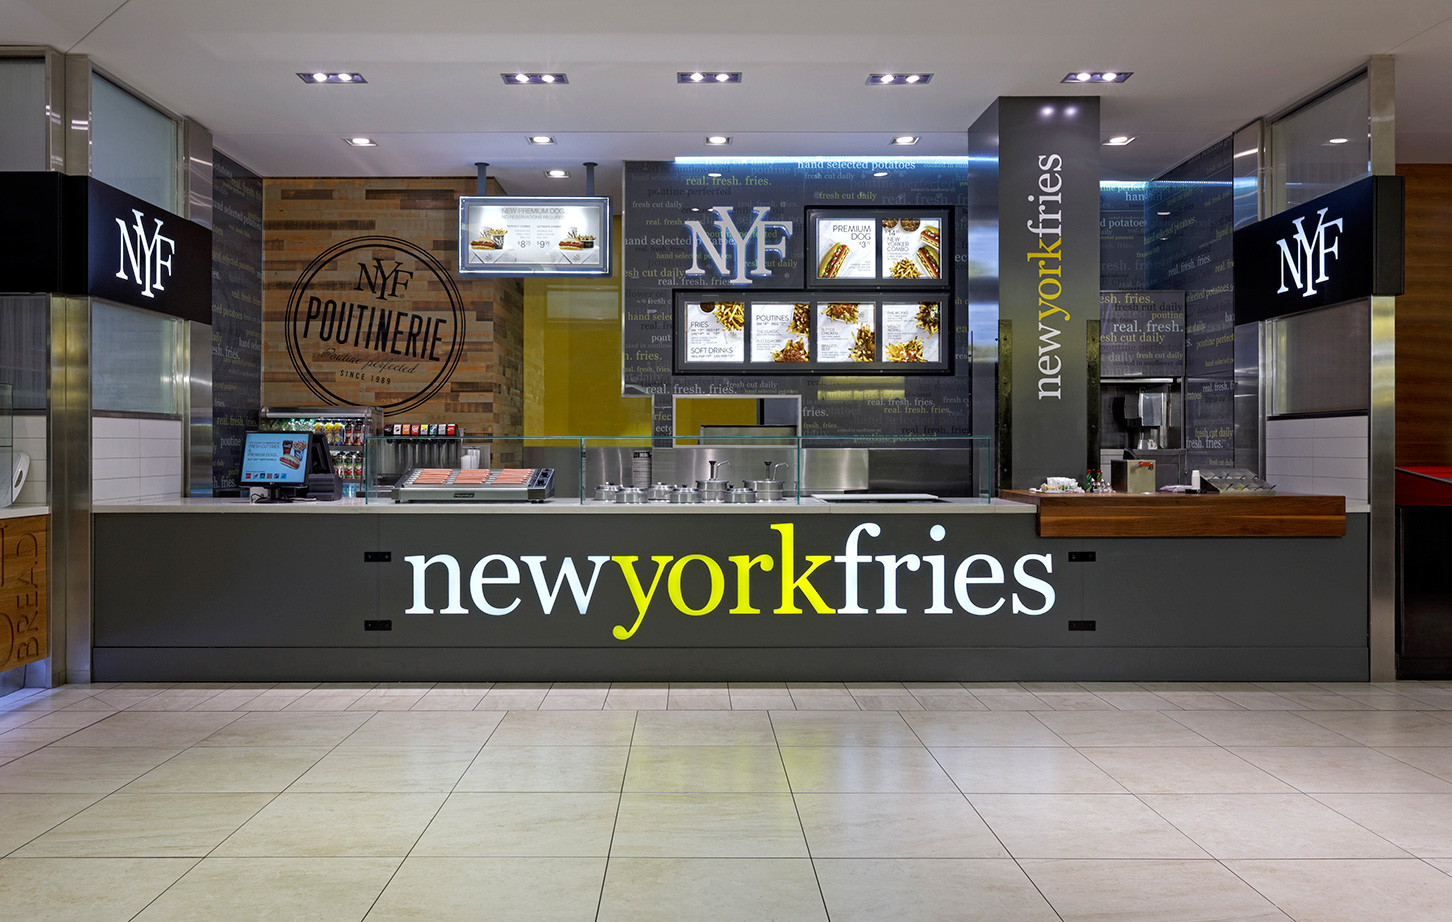 New York Fries to open first franchise in India this summer